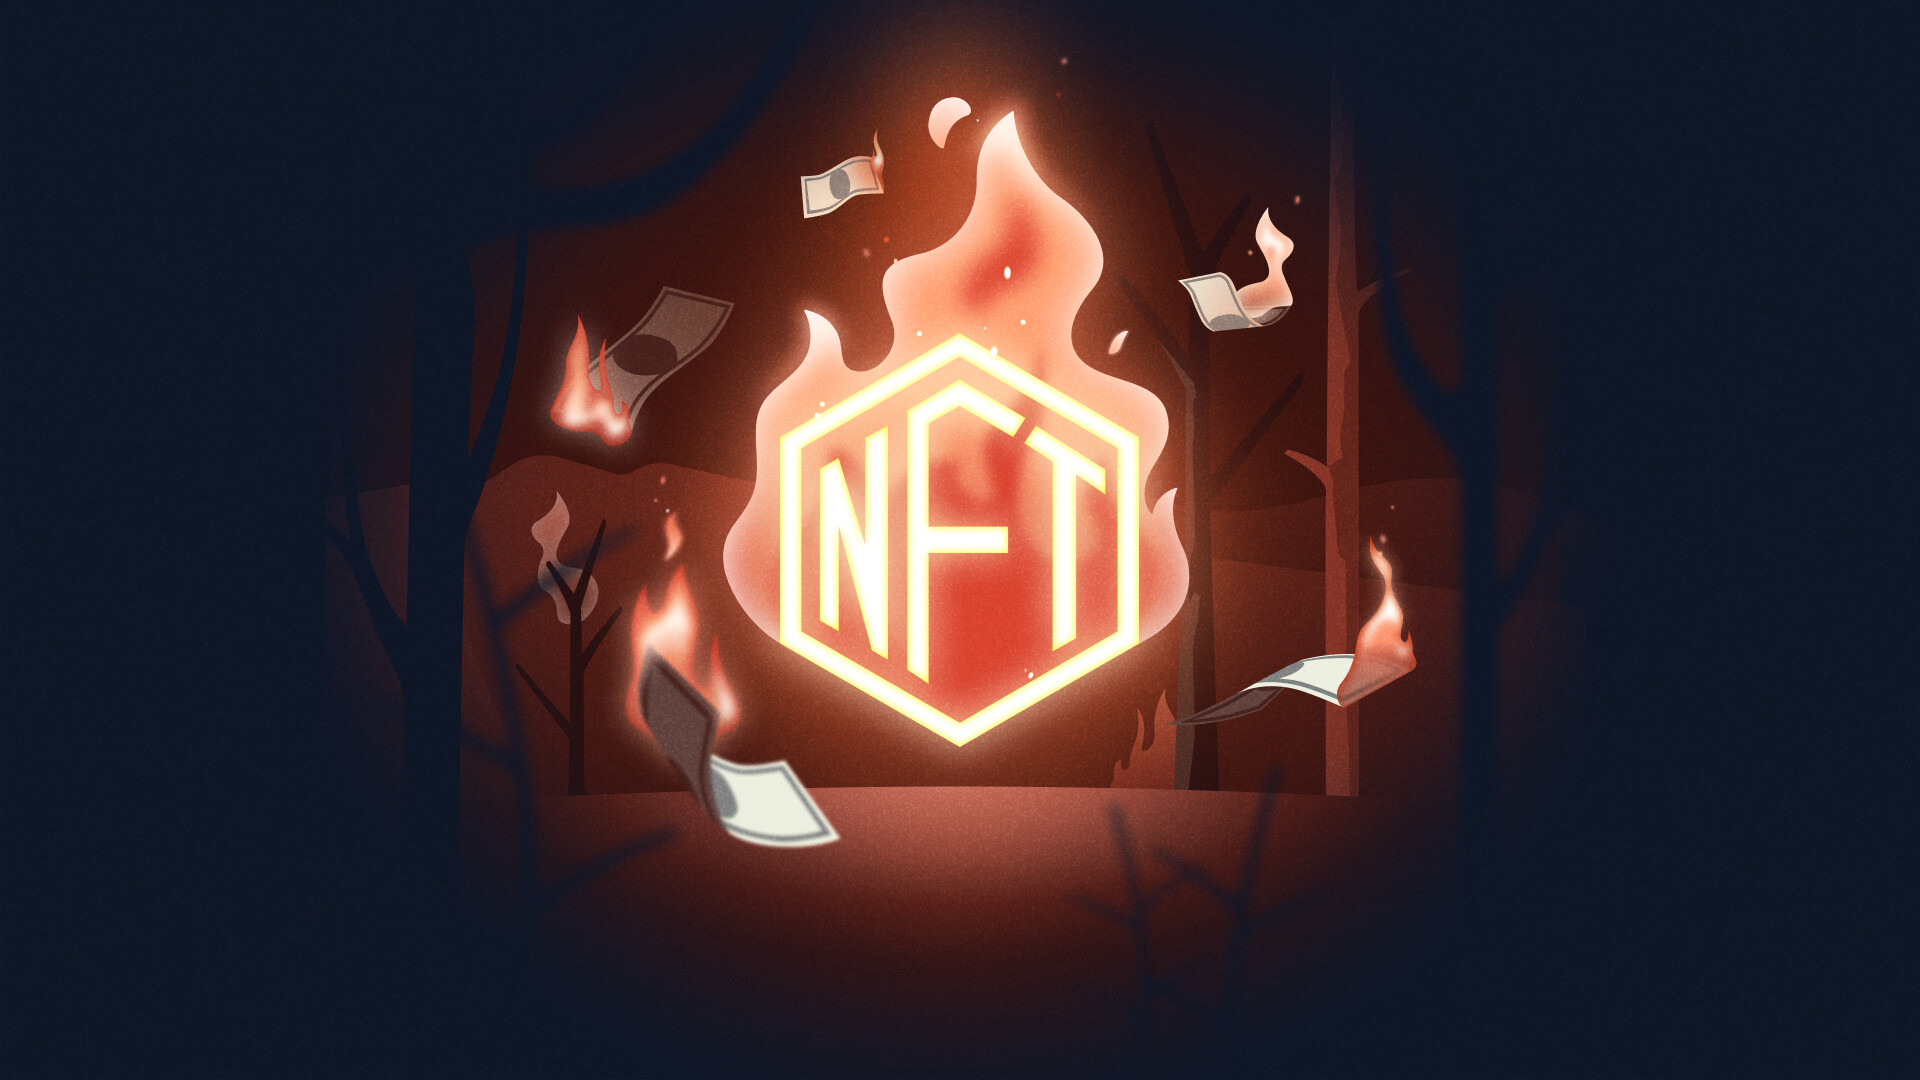 NFT: One-of-a-kind token, Contain references to digital files such as photos, videos, and audio. 1920x1080 Full HD Background.